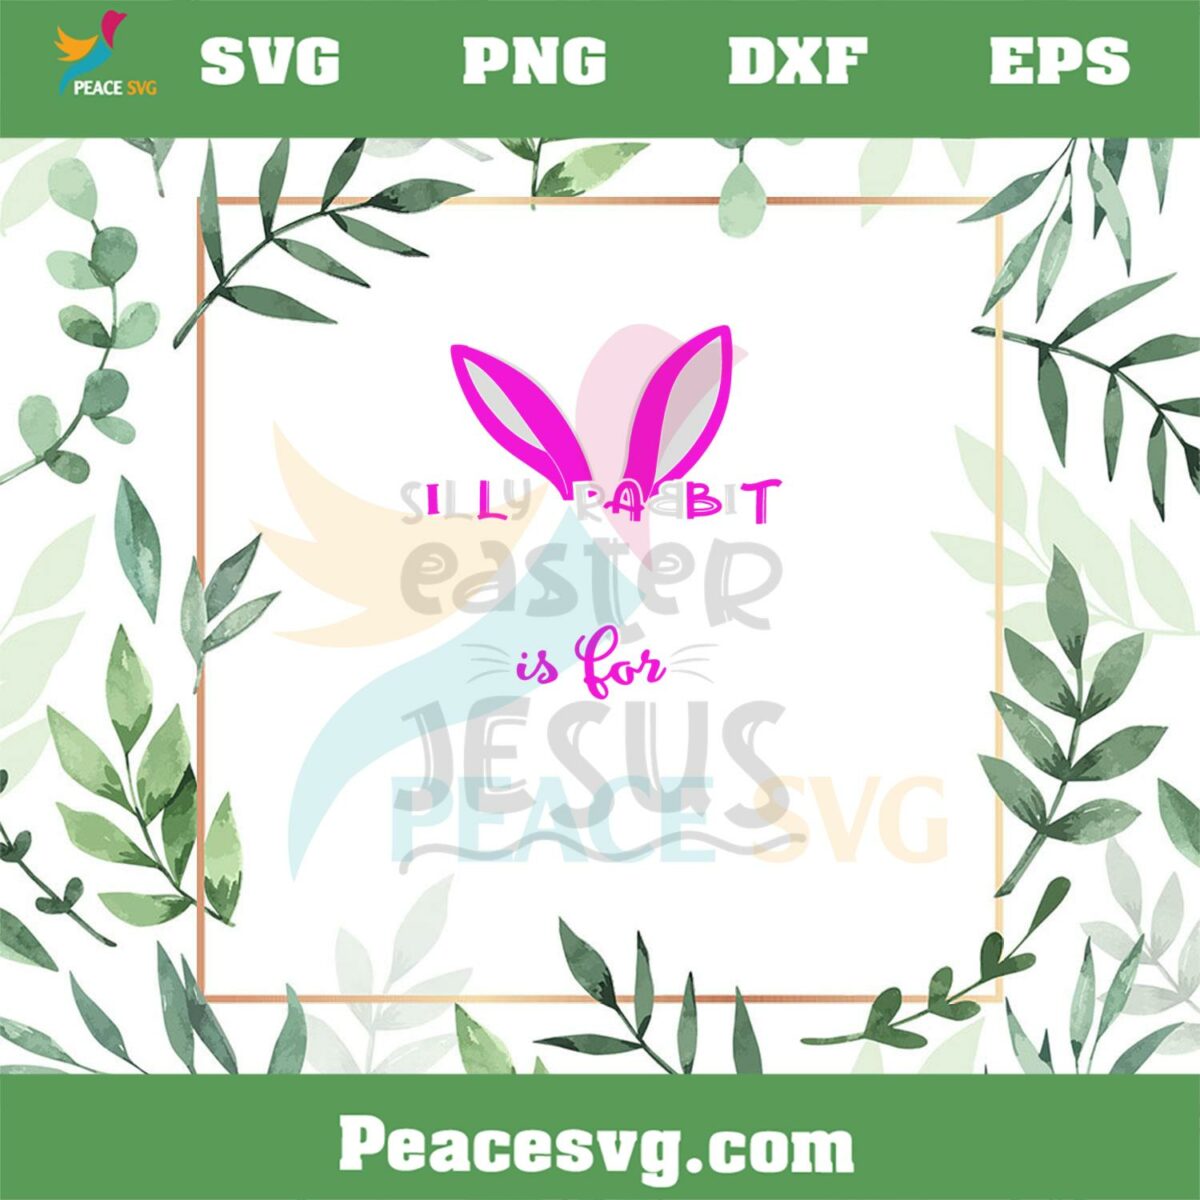 Silly Rabbit Easter Is For Jesus Easter Bunny Ear Svg Cutting Files